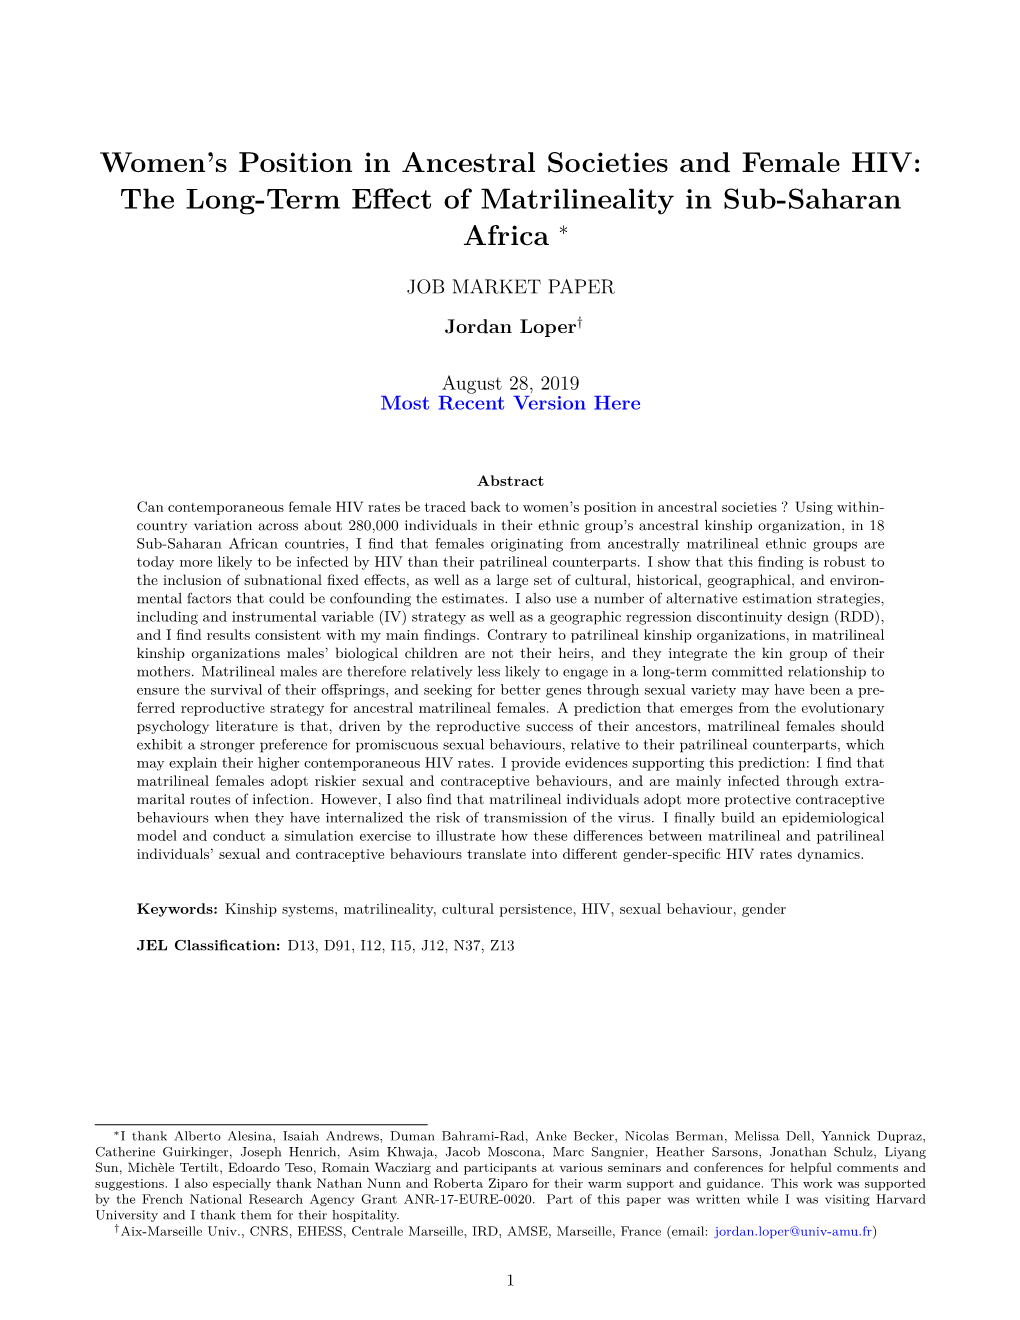 Women's Position in Ancestral Societies and Female HIV: the Long-Term Effect of Matrilineality in Sub-Saharan Africa